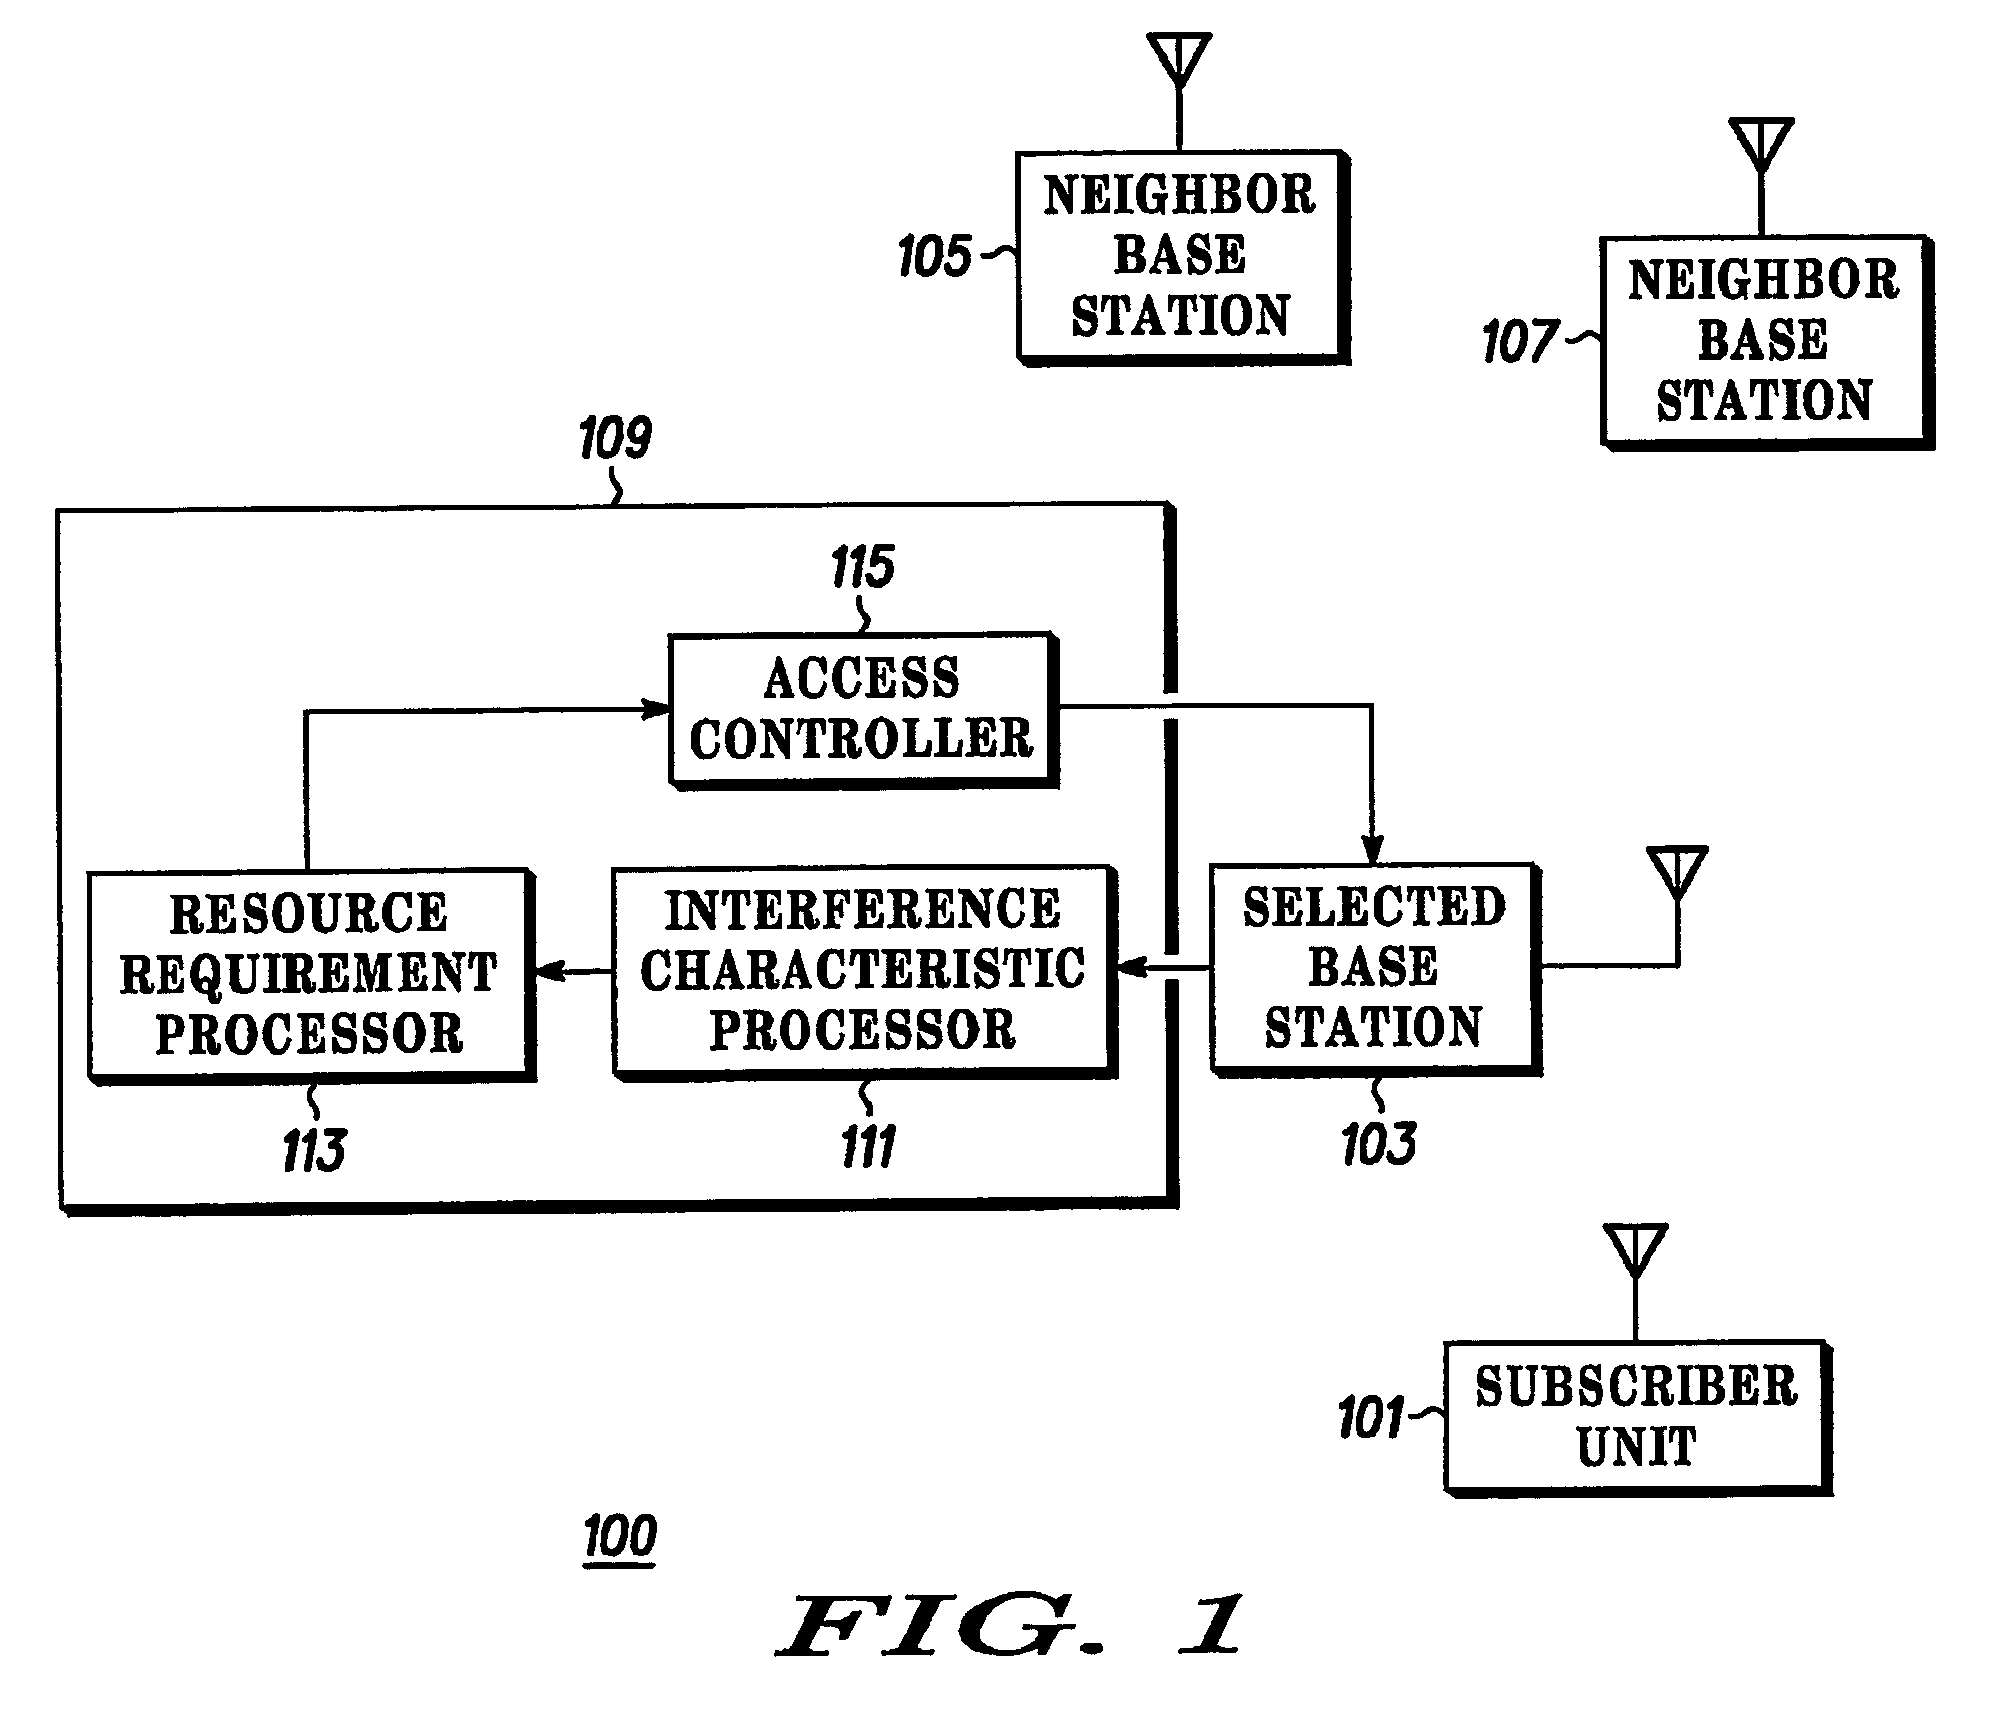 Apparatus and method of radio access management for a radio communication system